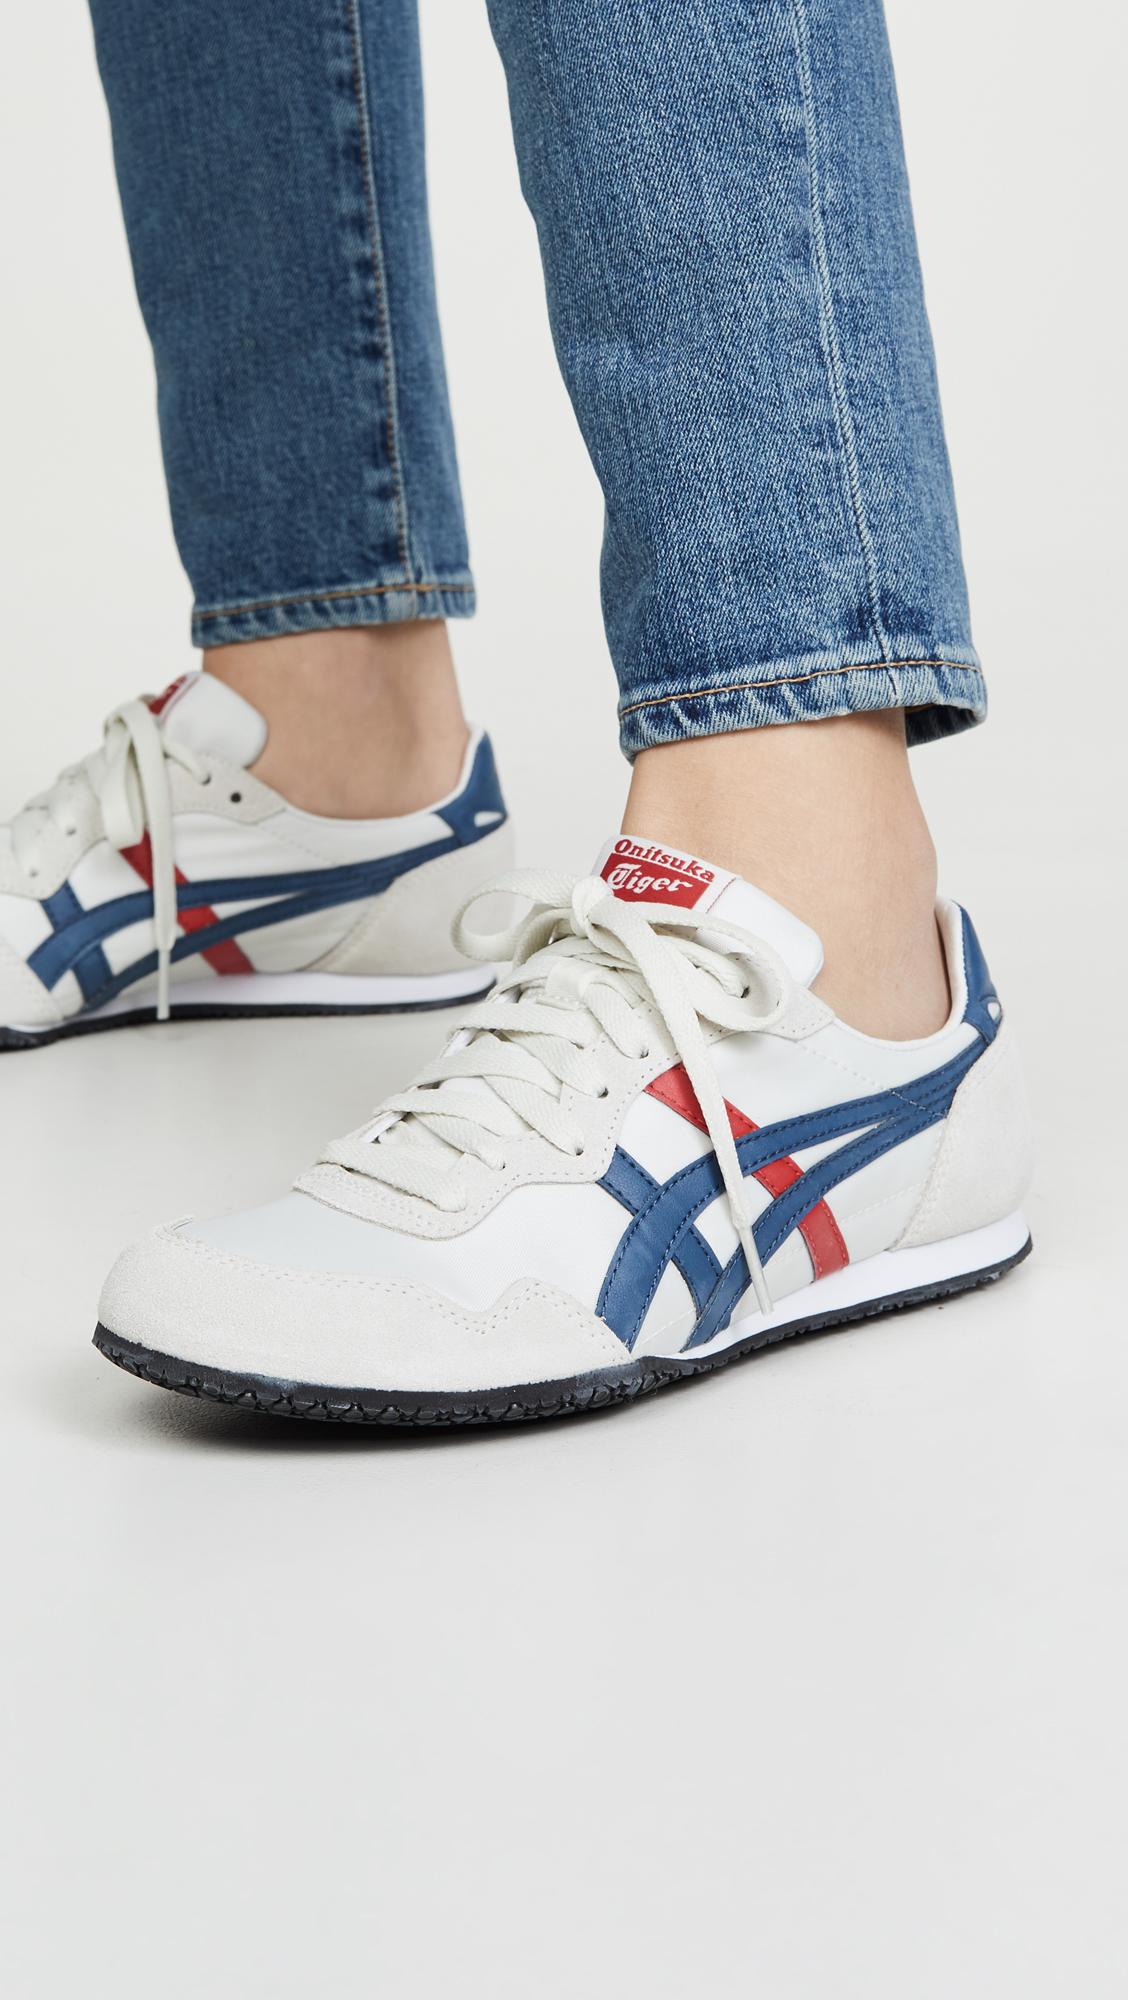 Onitsuka Tiger Leather Serrano Sneakers in Blue - Lyst